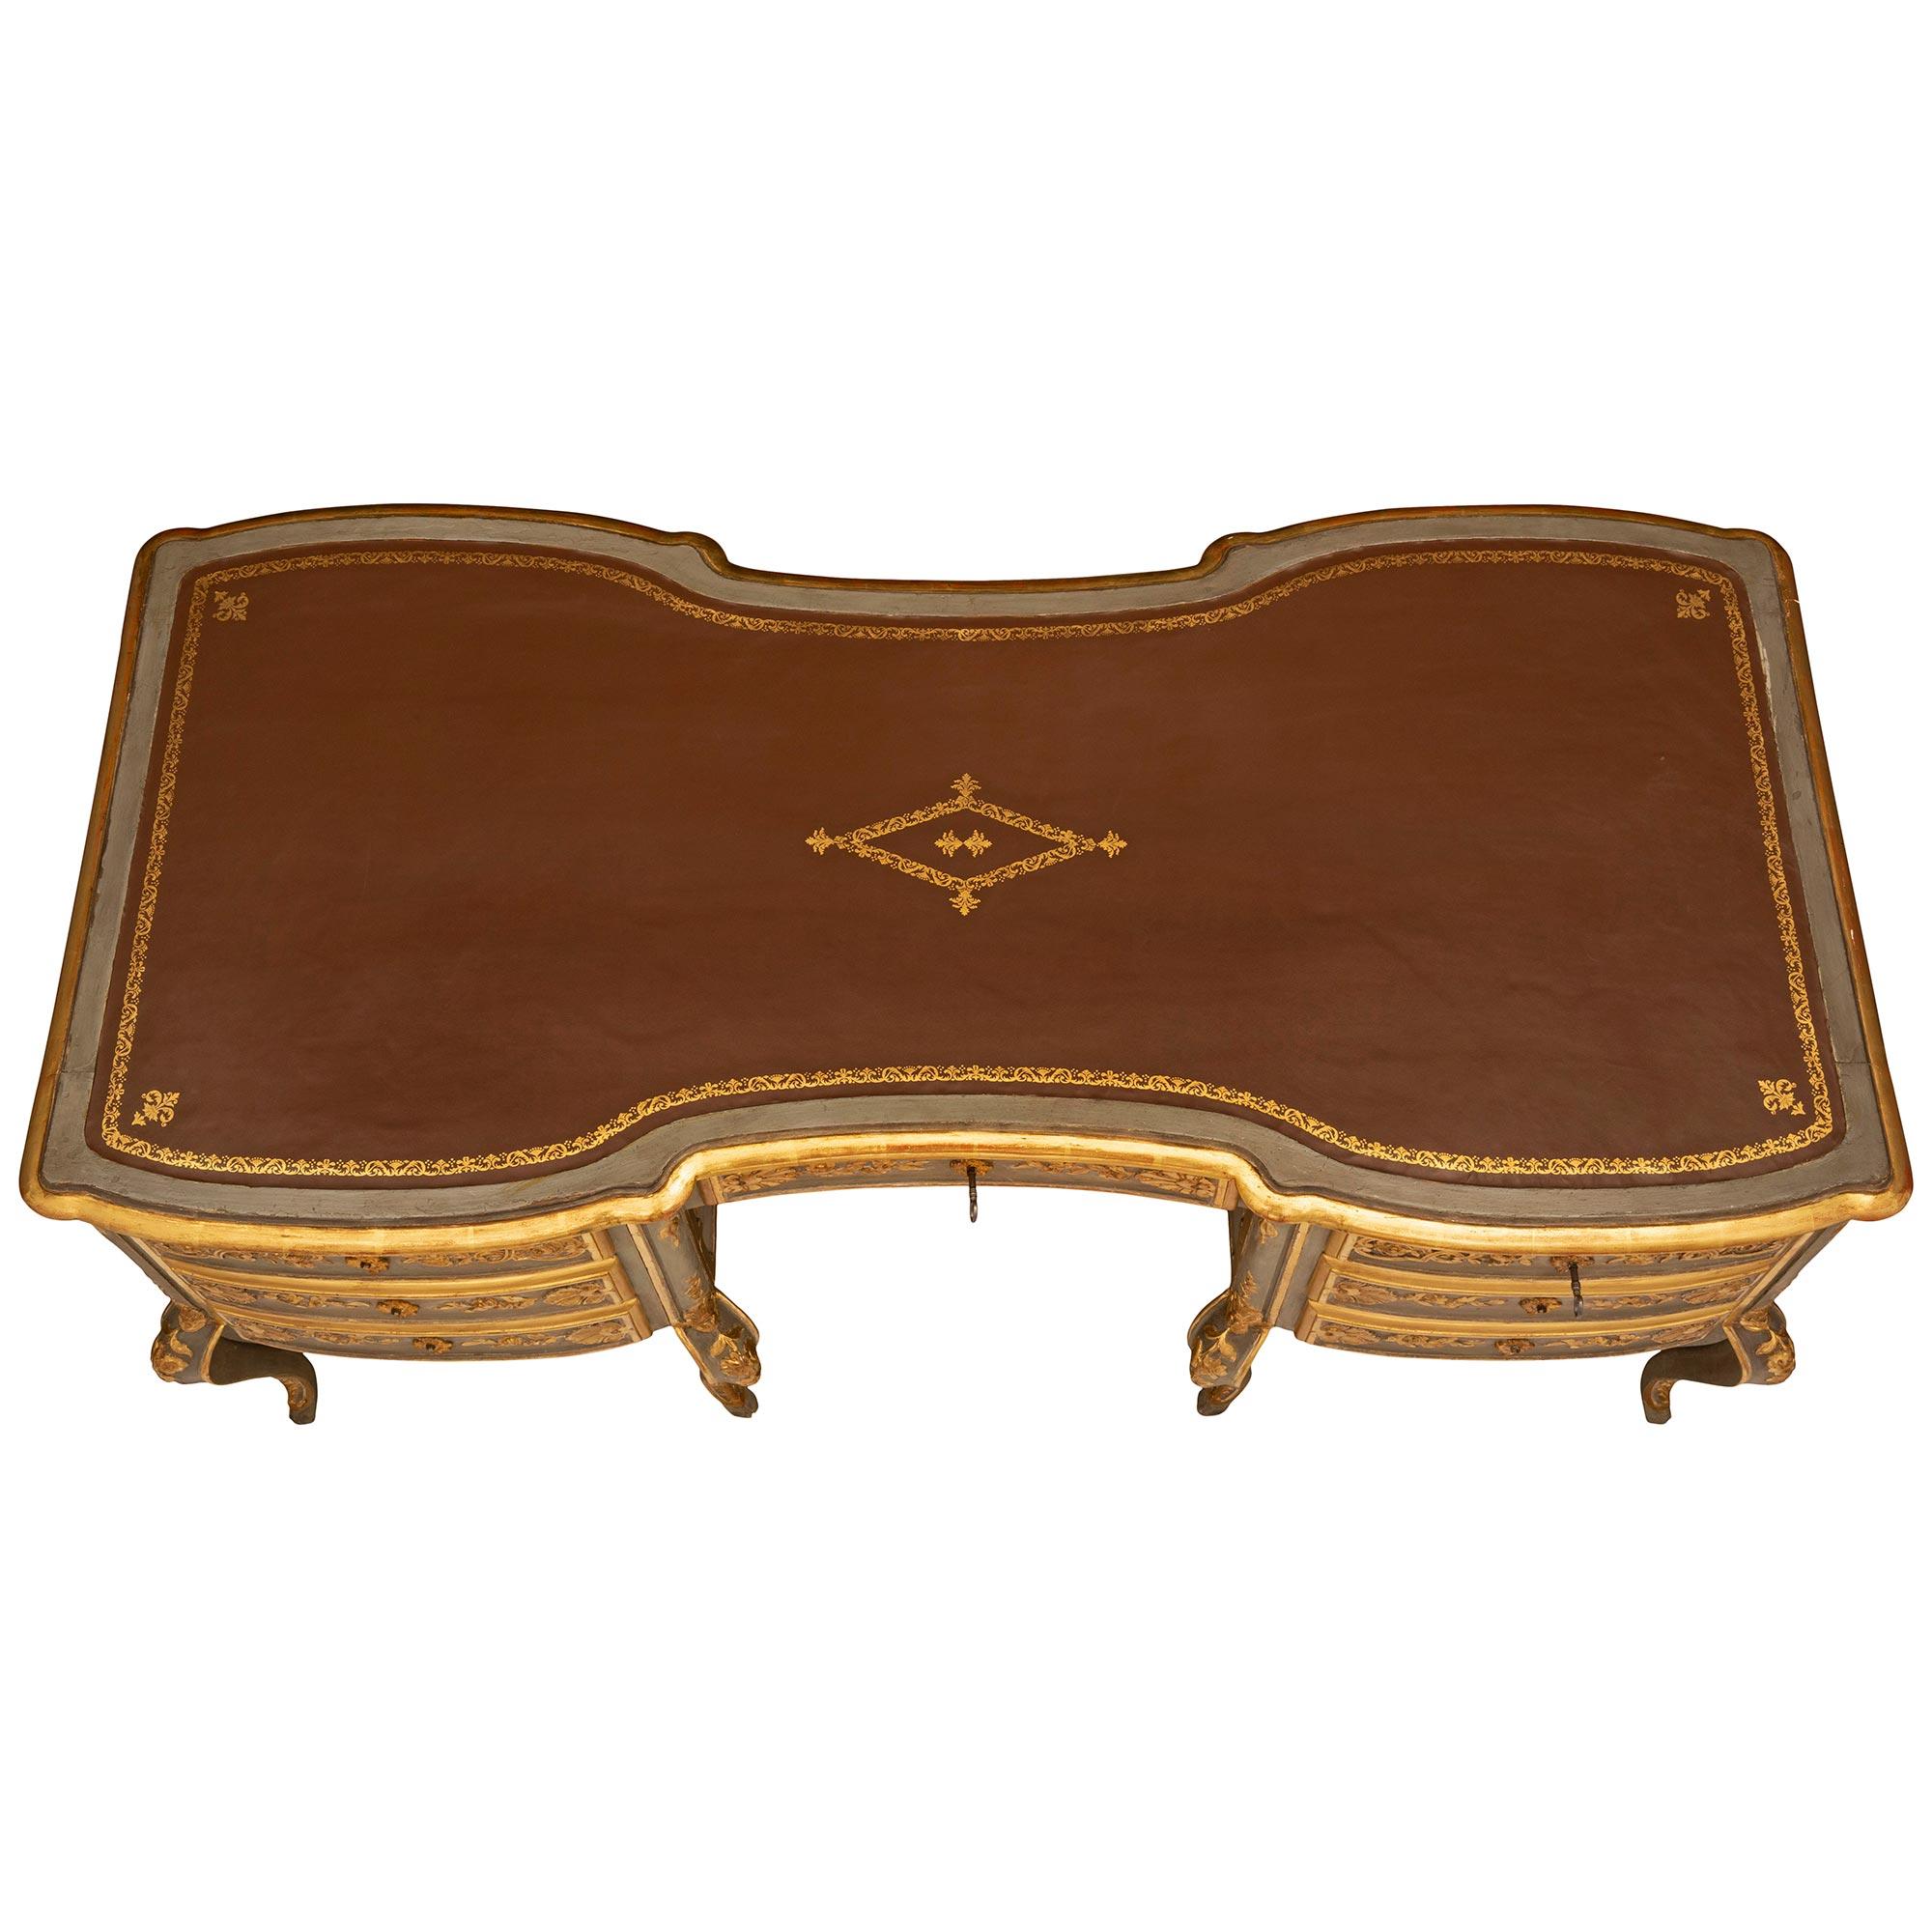 A spectacular and extremely unique Italian mid 19th century Venetian st. patinated and giltwood desk. The most decorative seven drawer desk is raised by eight elegant luxuriously curved tapered legs with finely carved giltwood acanthus leaves and